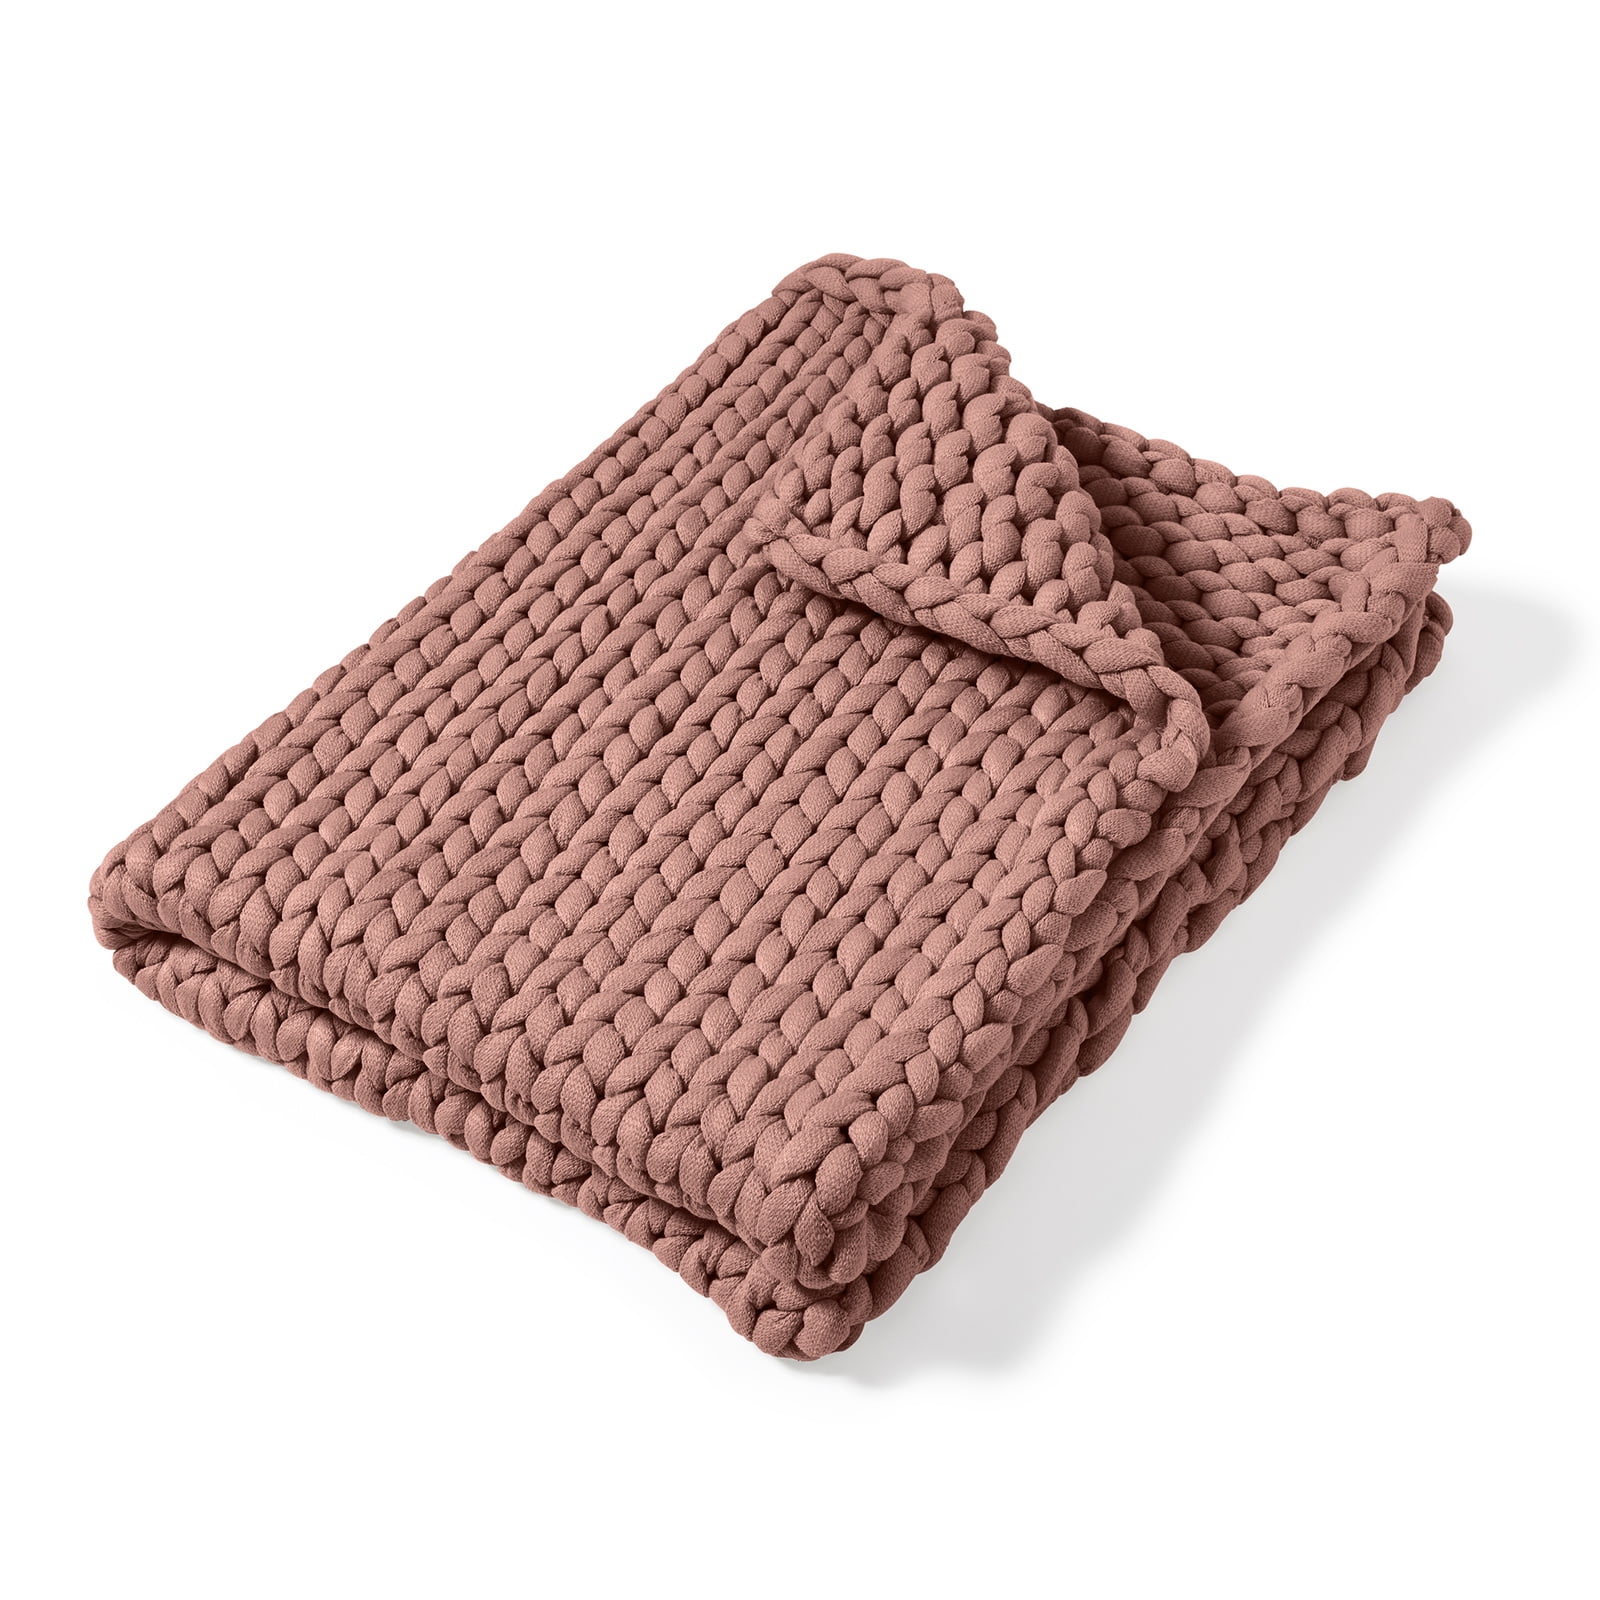 Throw Blanket - Chunky Knit Camel by Donna Sharp - Contemporary Decorative Throw  Blanket with Over-Sized Loop Pattern 